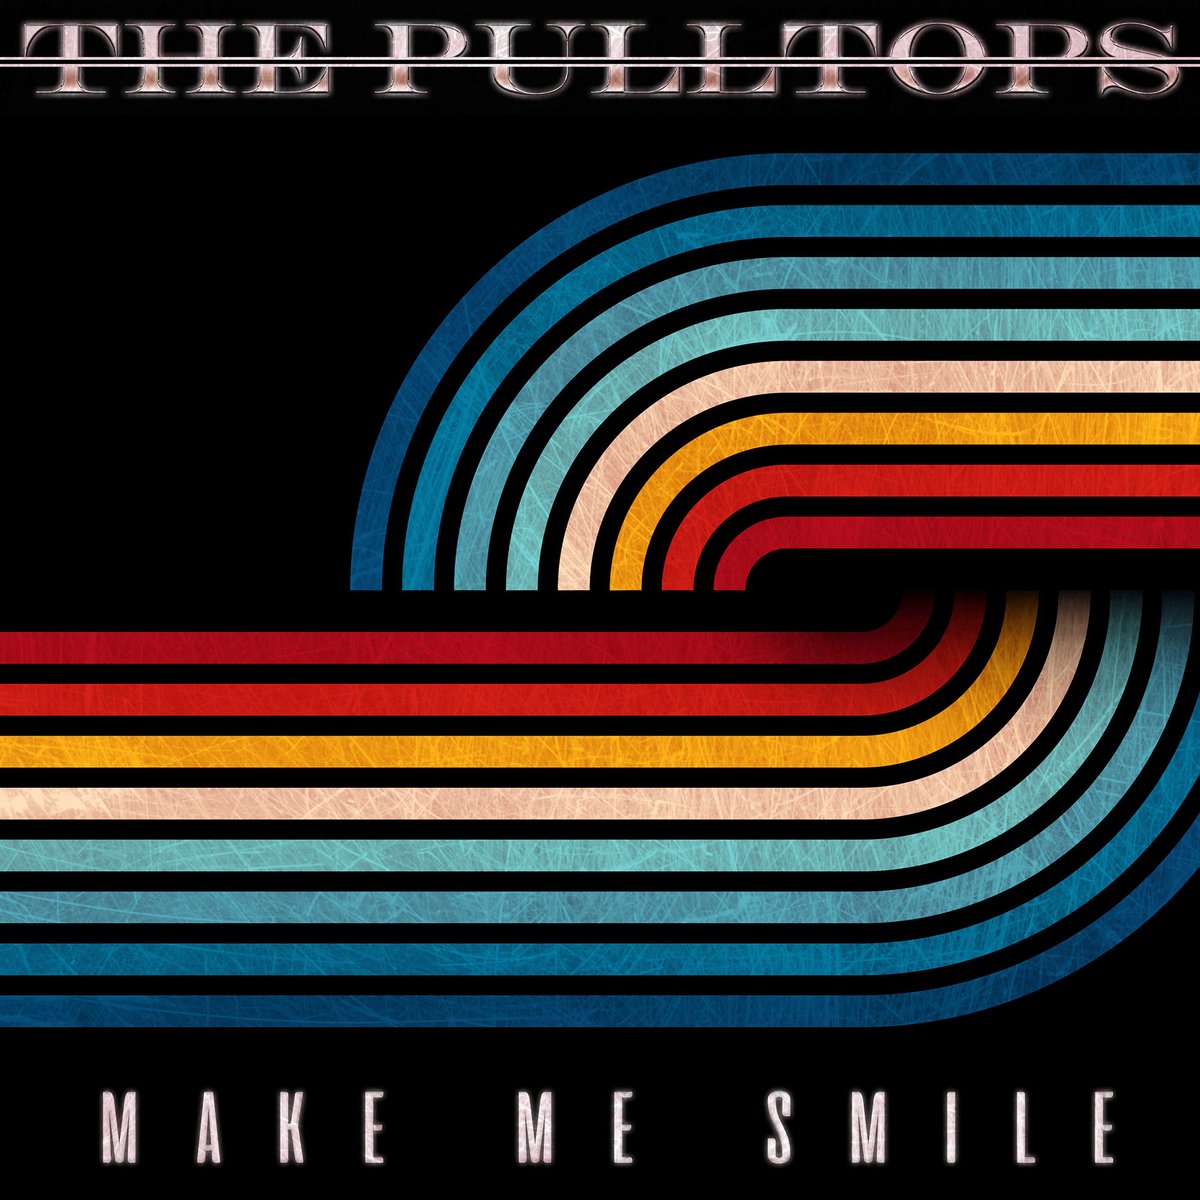 Listen to the single 'Make Me Smile' and immerse yourself in the world of romance and reliability with the incomparable @pulltops
#indiedockmusicblog #singlereview #poprock #indierock #rock #alternativerock

indiedockmusicblog.co.uk/?p=20798&fbcli…